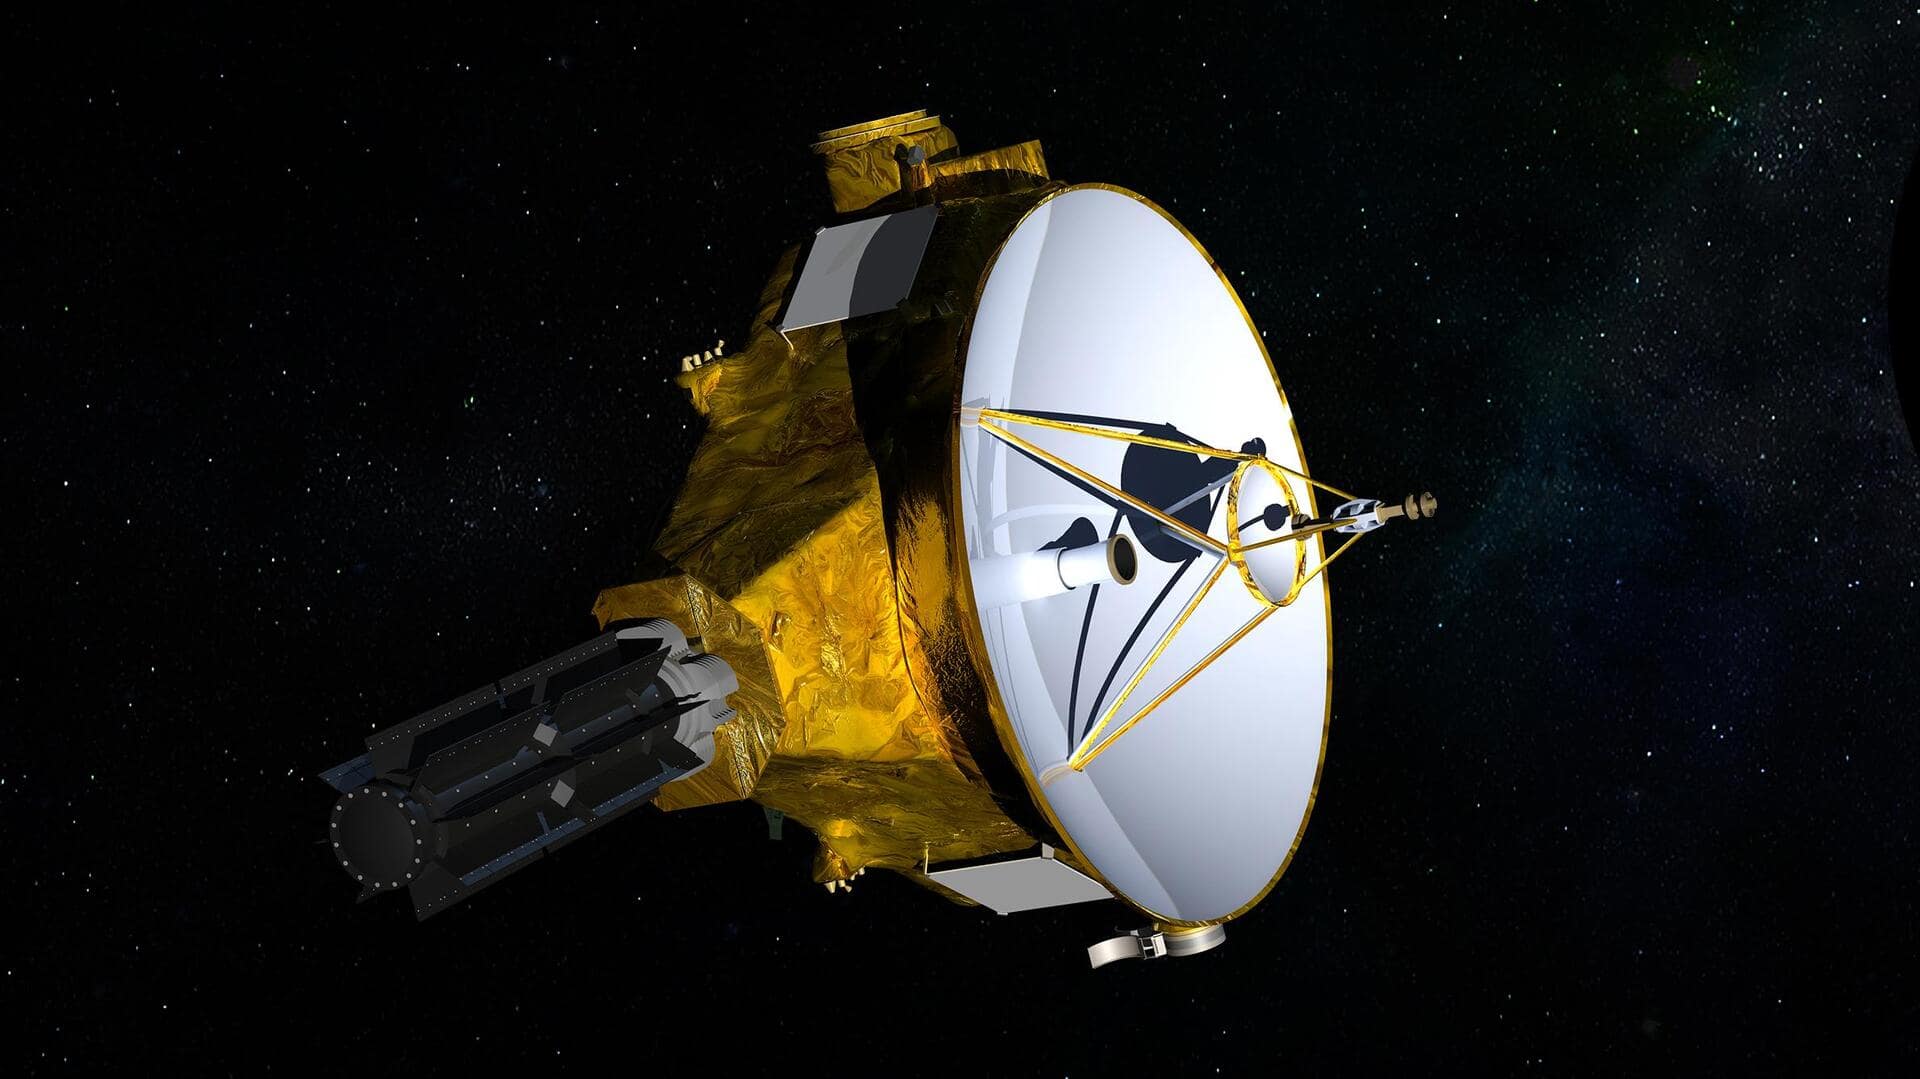 NASA's New Horizons mission extended to explore outer solar system